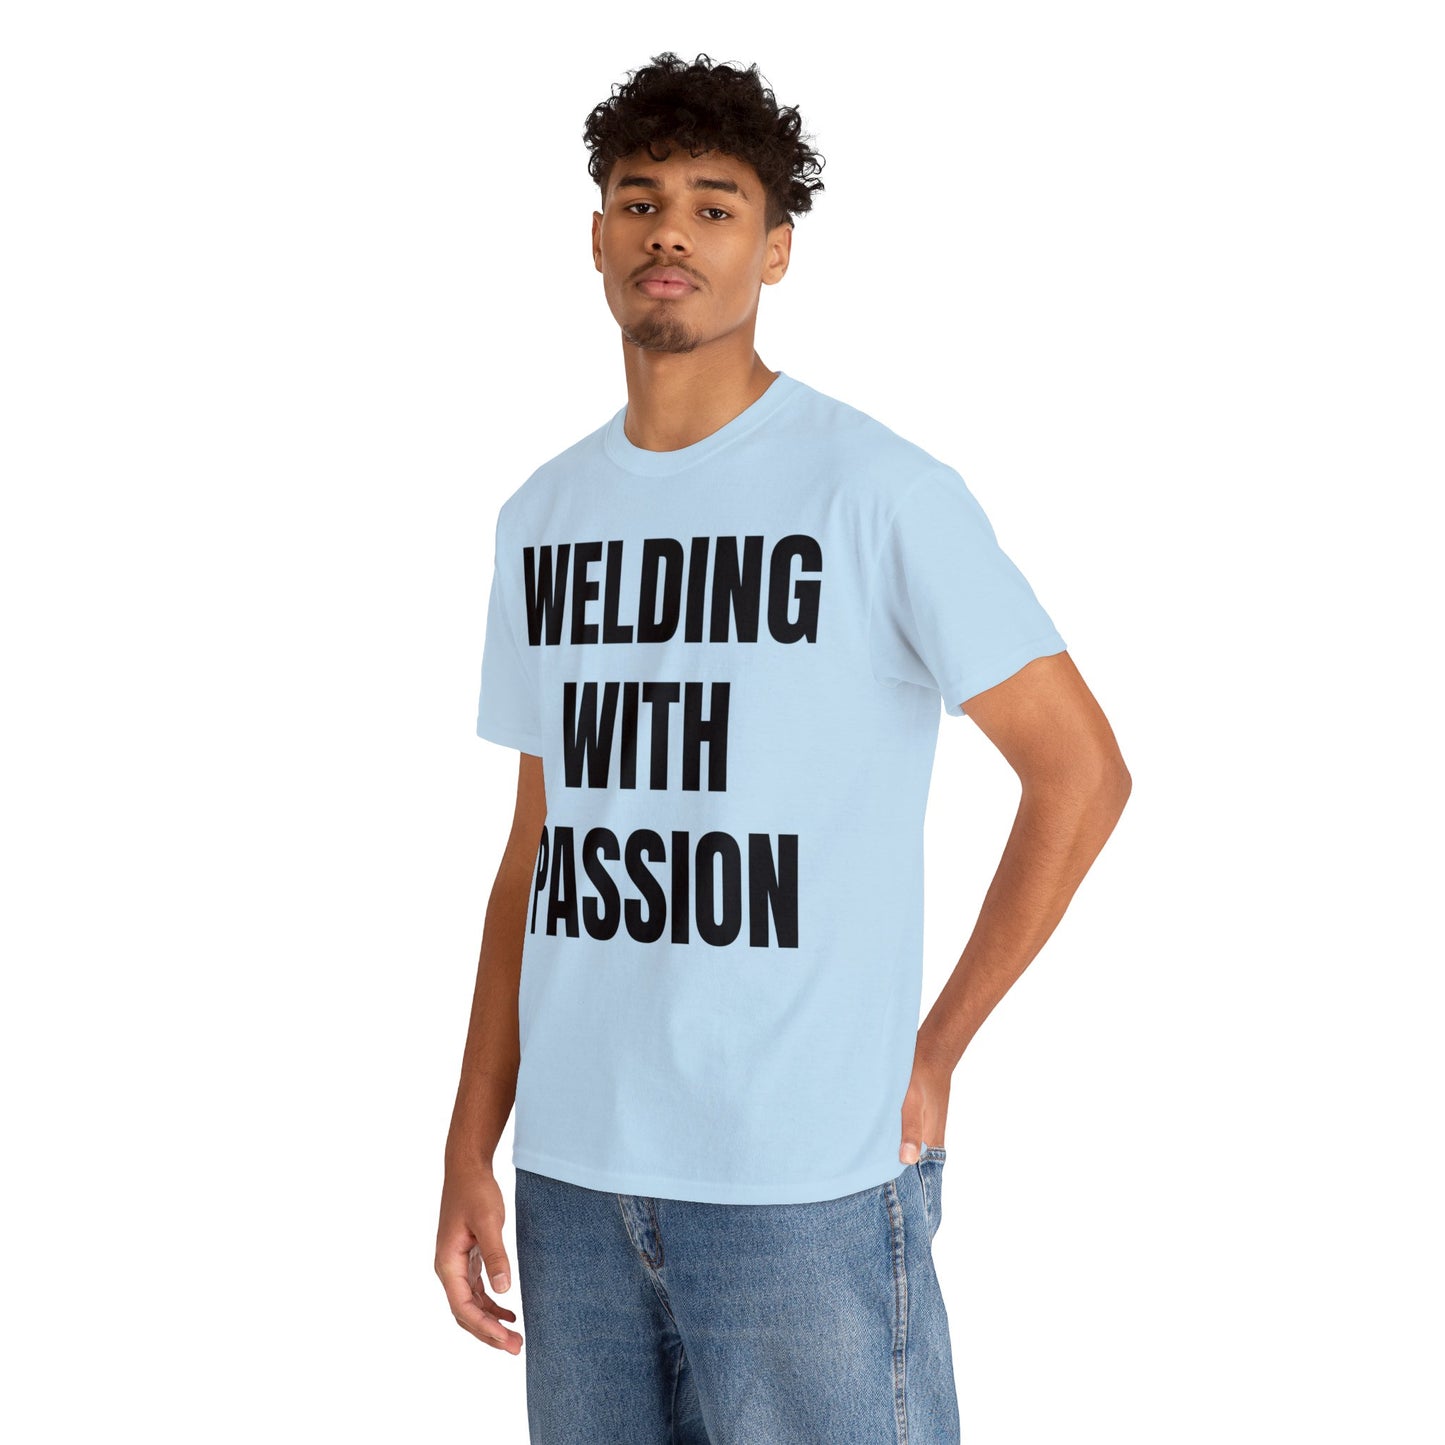 WELDING WITH PASSION-Unisex Heavy Cotton Tee